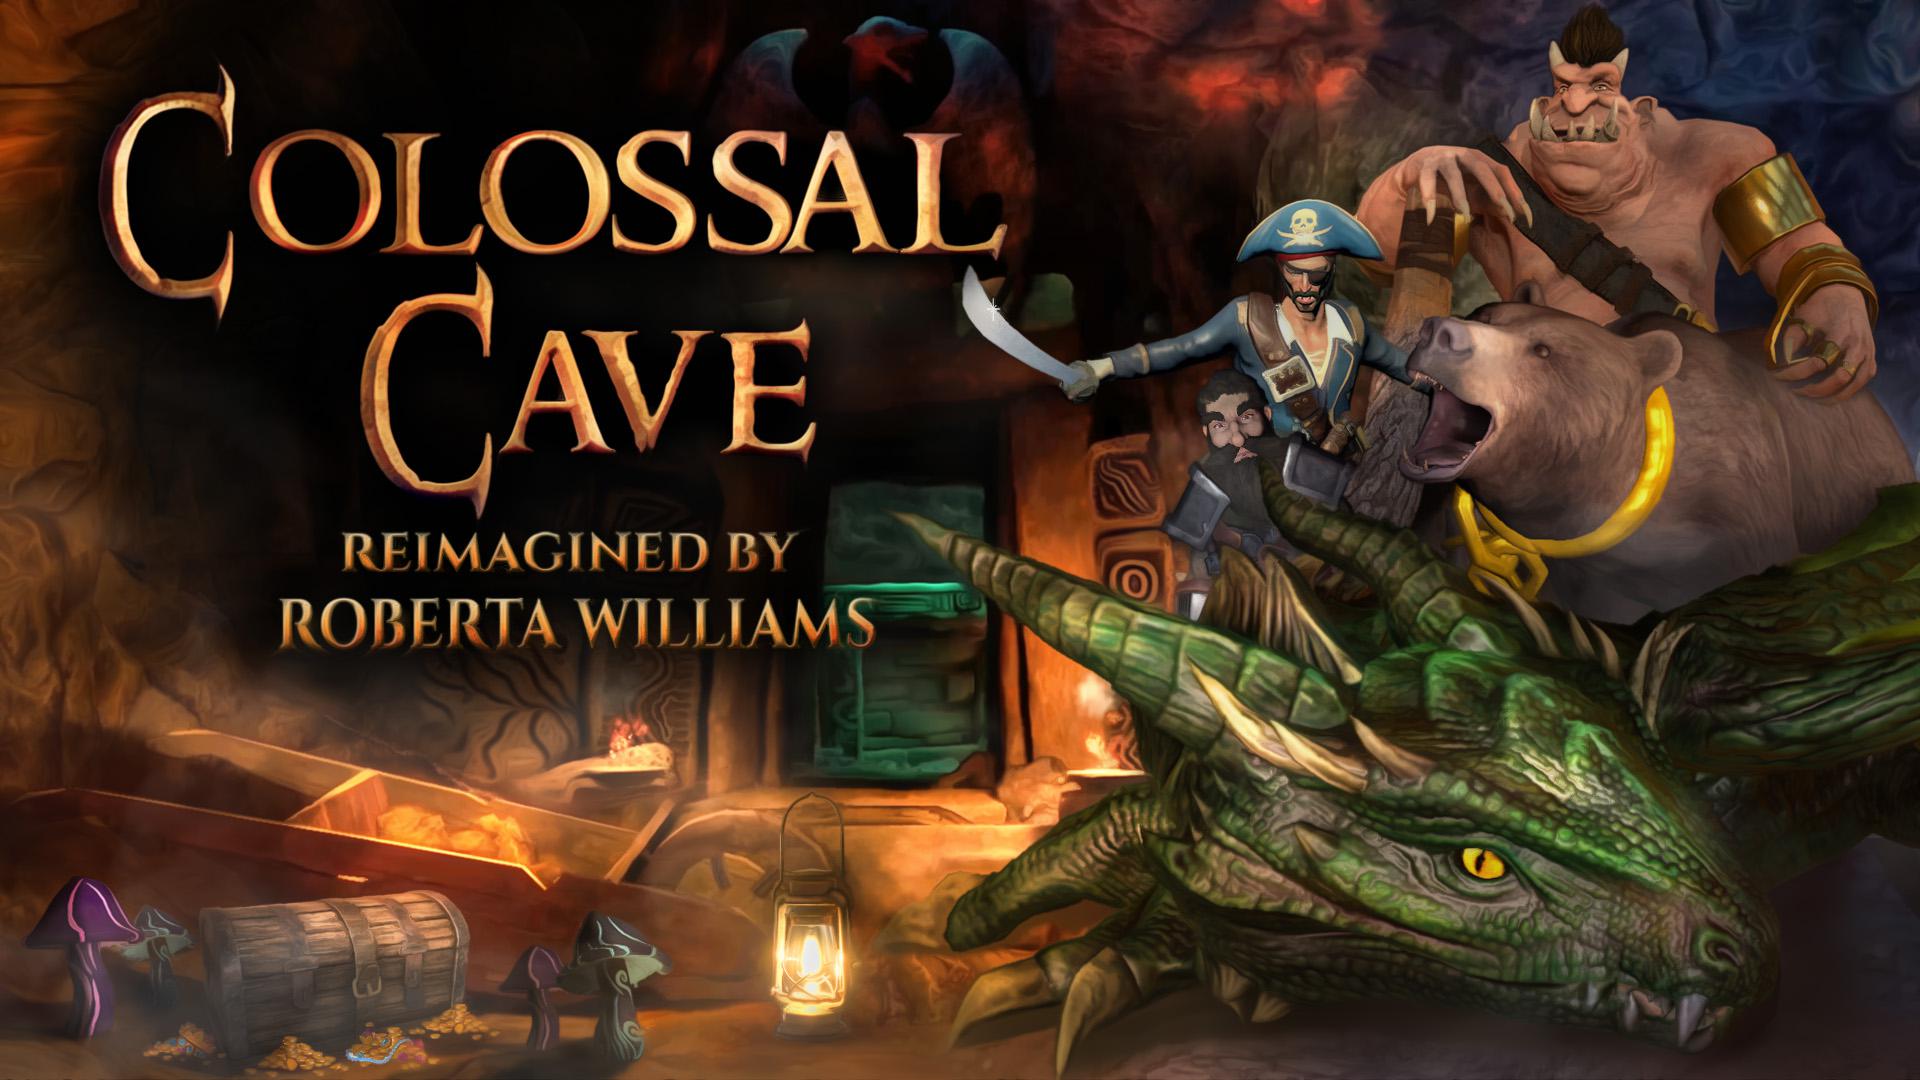 a-new-colossal-cave-trailer-was-shown-at-tga-with-a-release-date-early